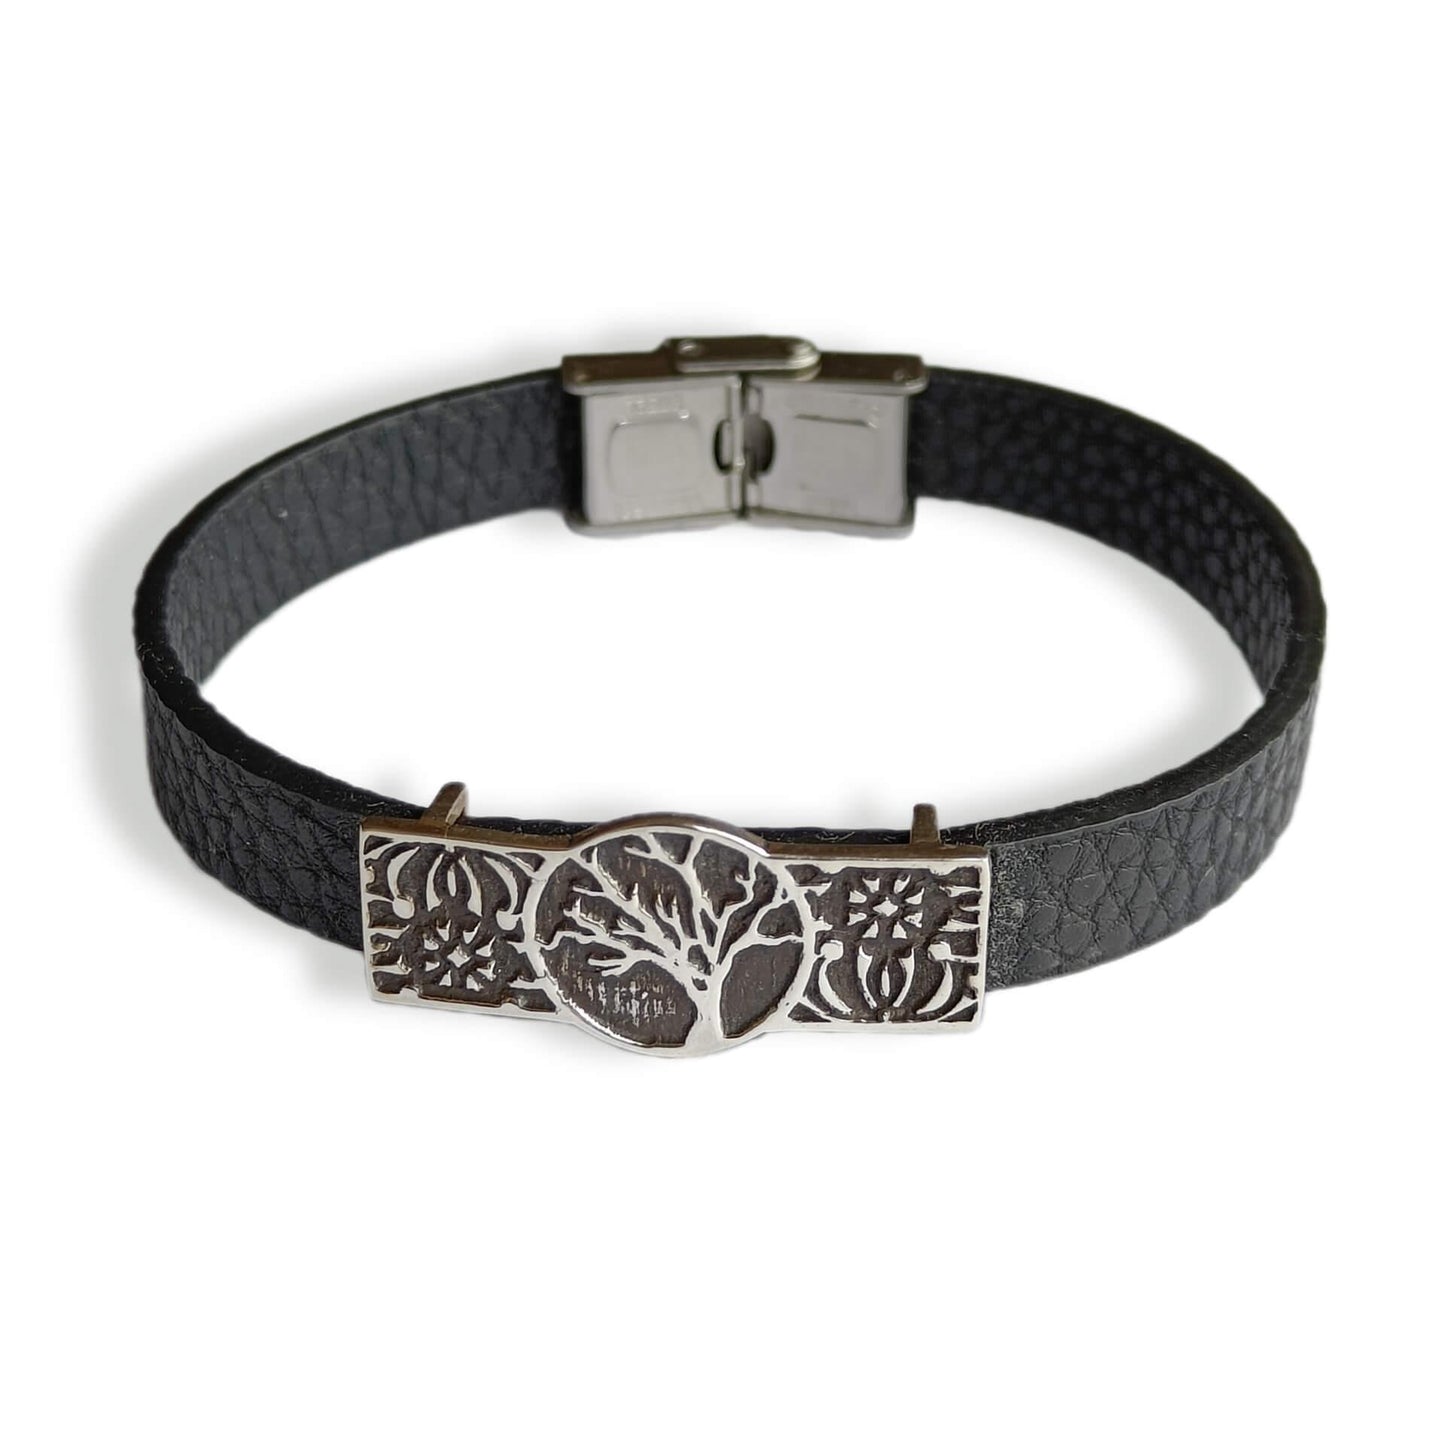 'Eden' Tree of Life 925 Sterling Silver & Leather